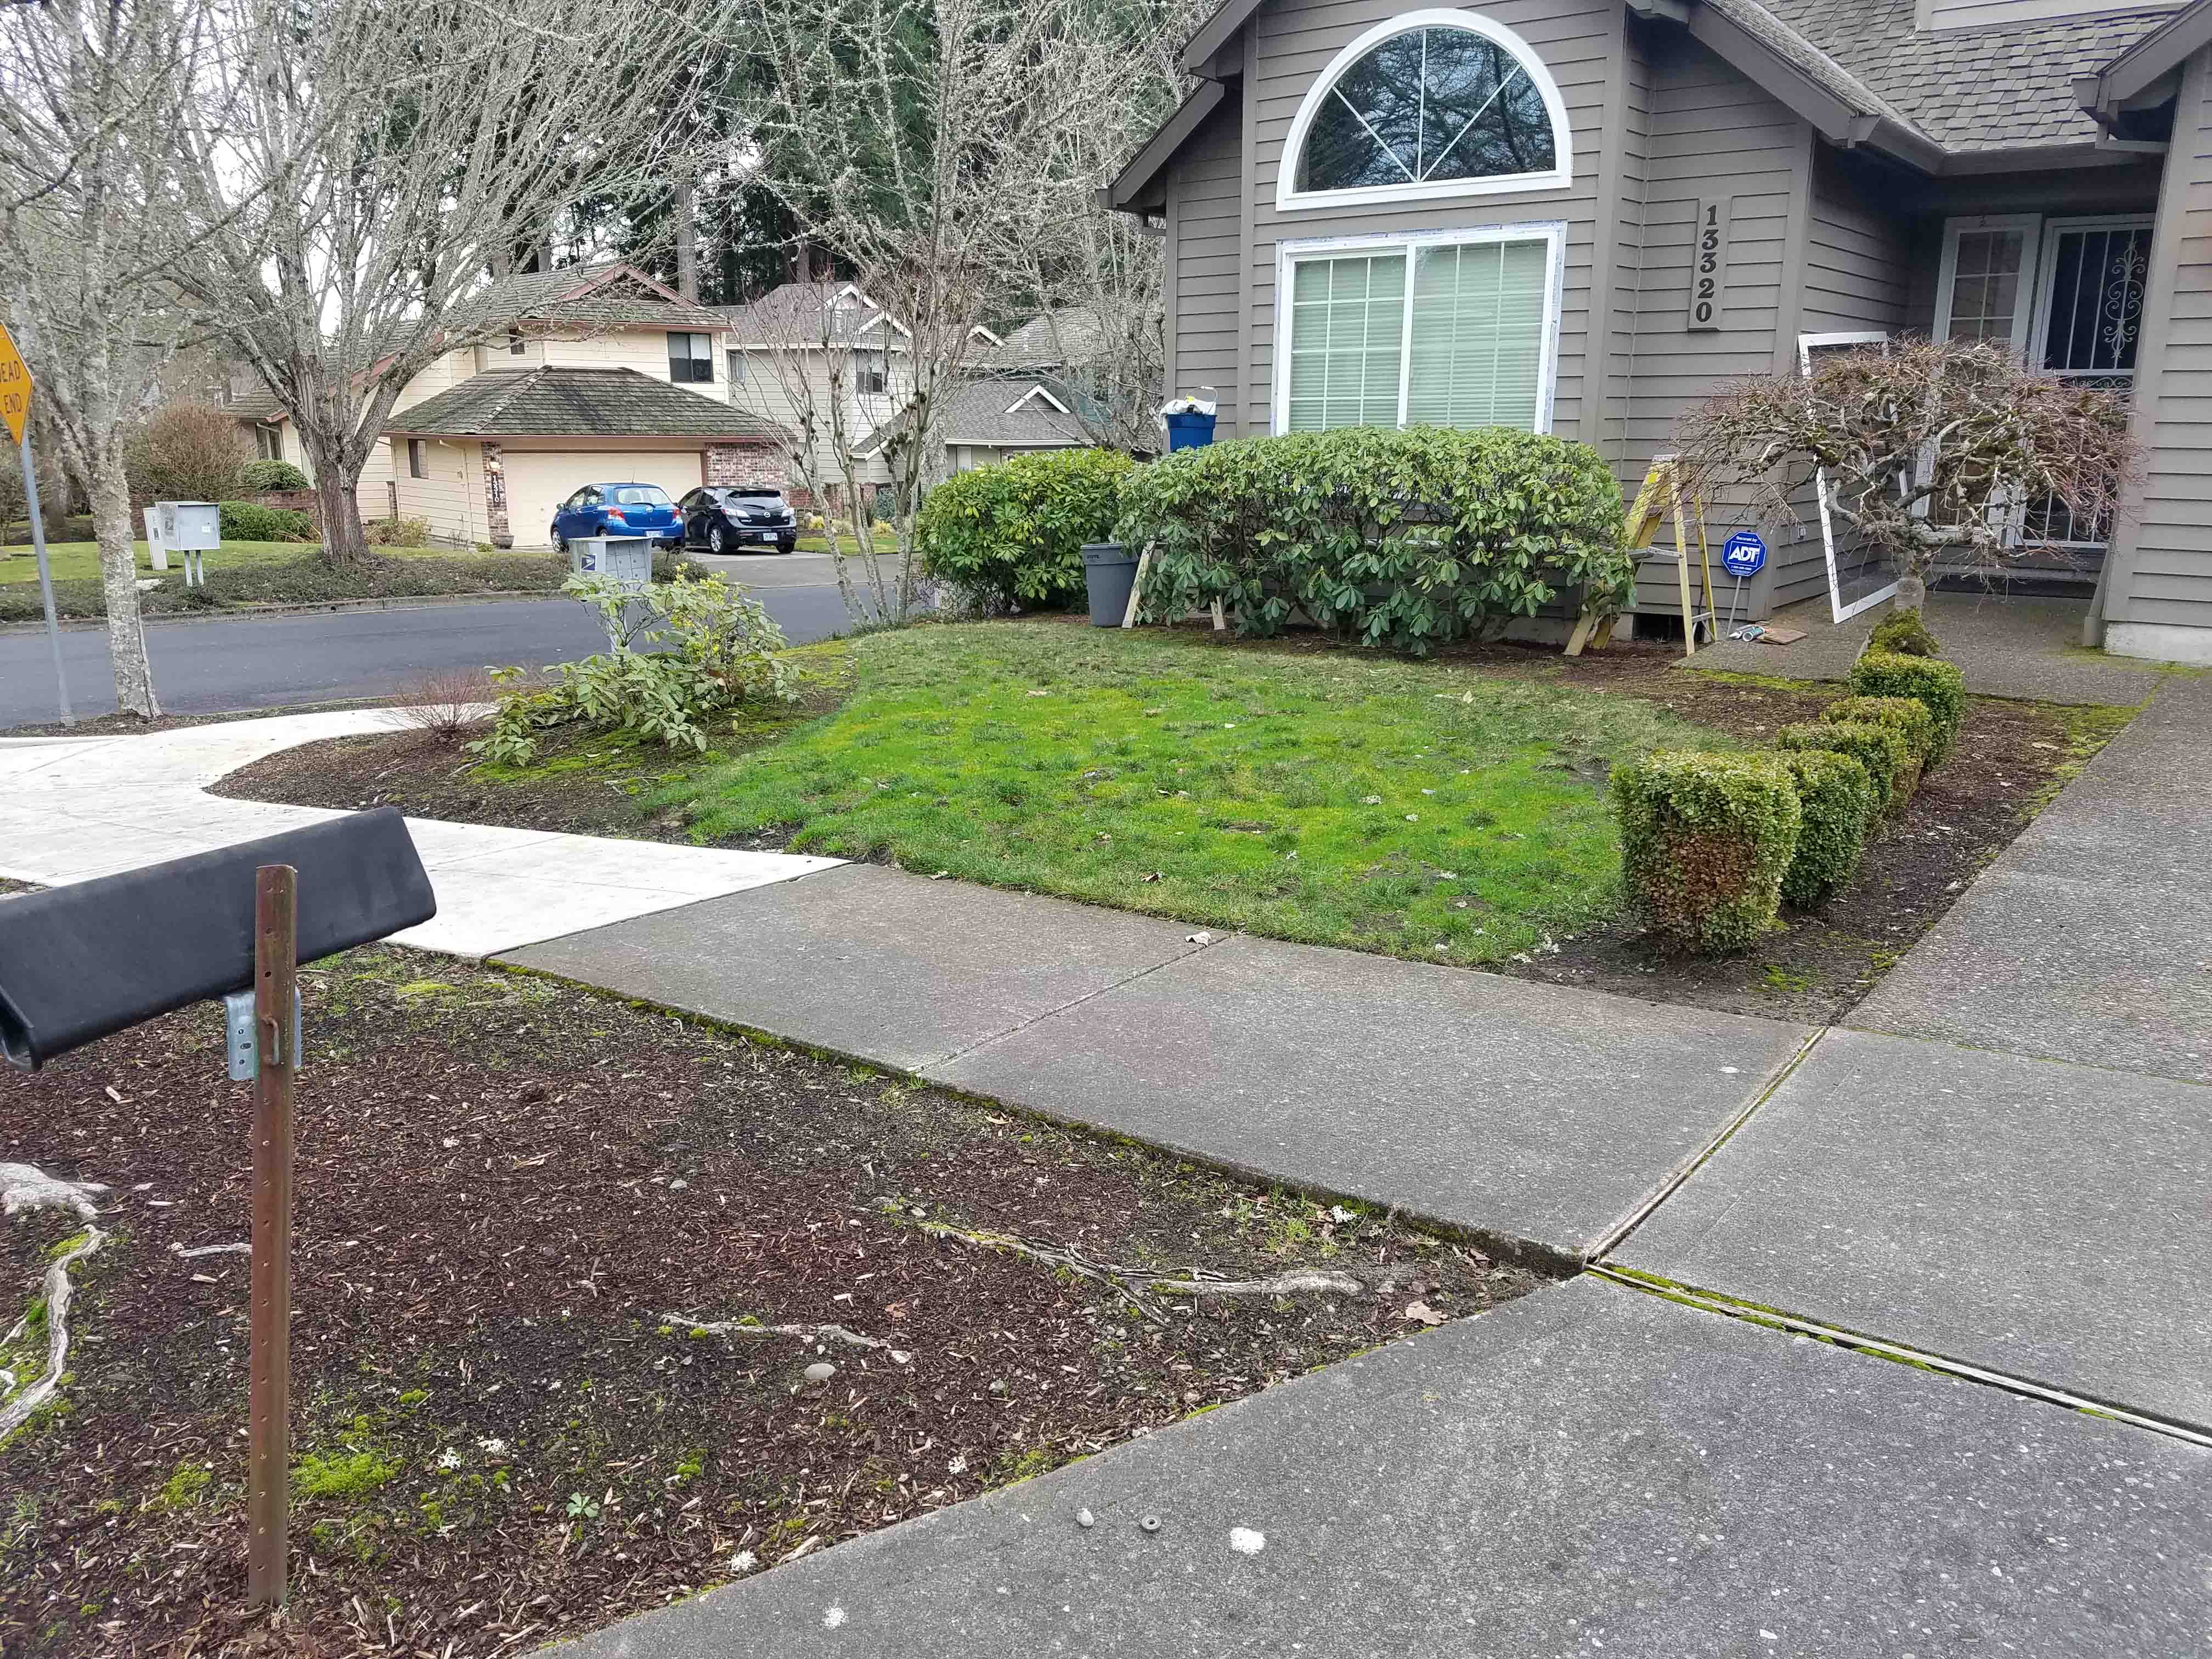 Front yard grassy patch with small bushes